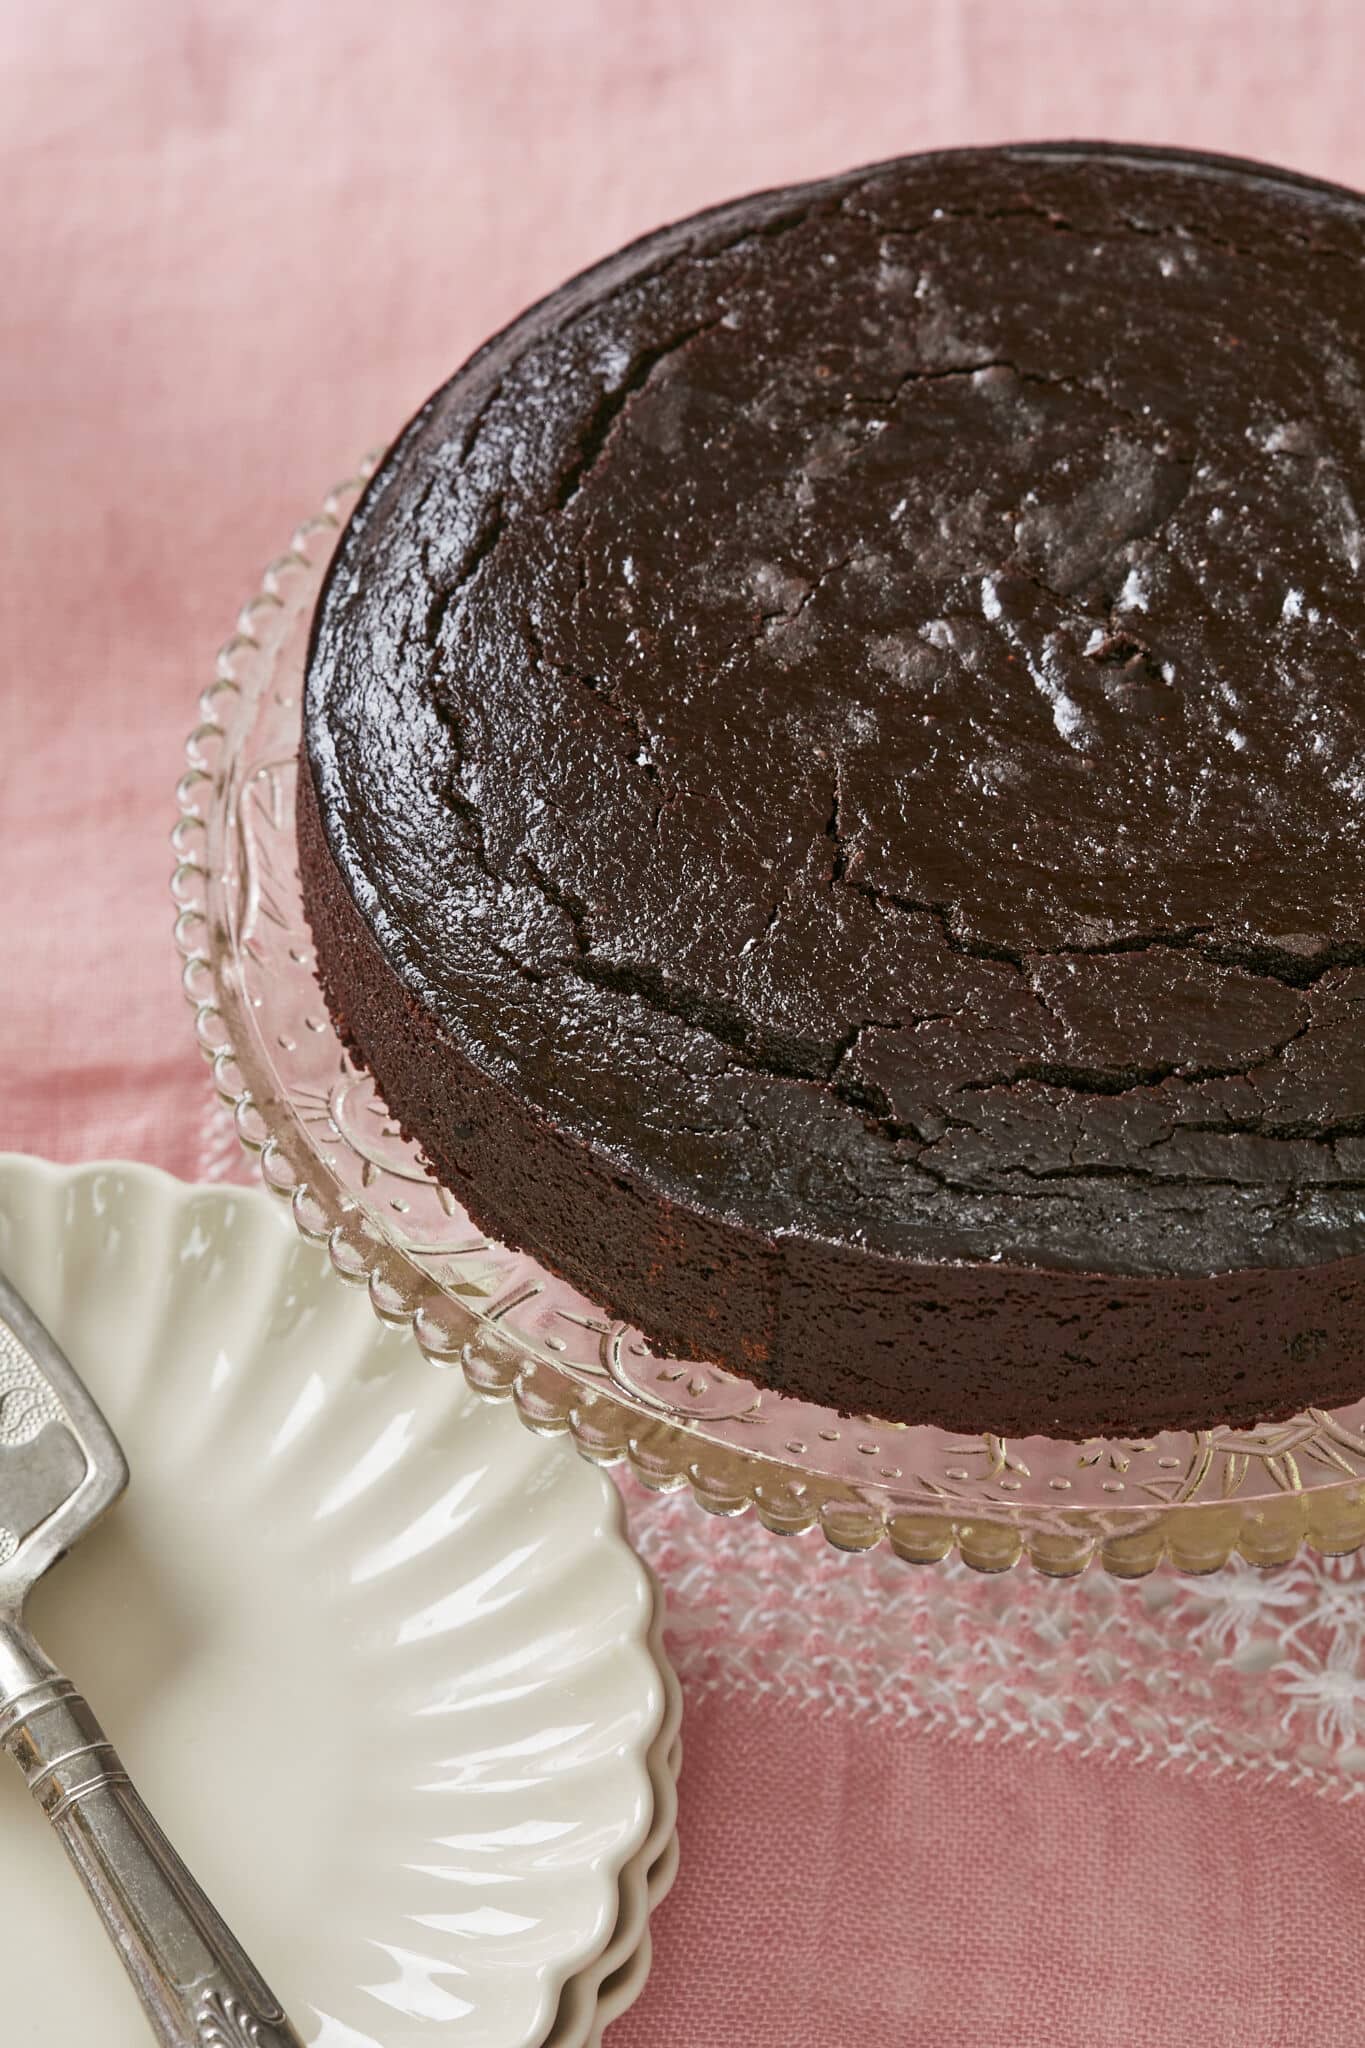 A rich, moist decadent Irish whiskey Chocolate Cake is served on a glass cake stand. The top is shiny and slightly crinkled. 